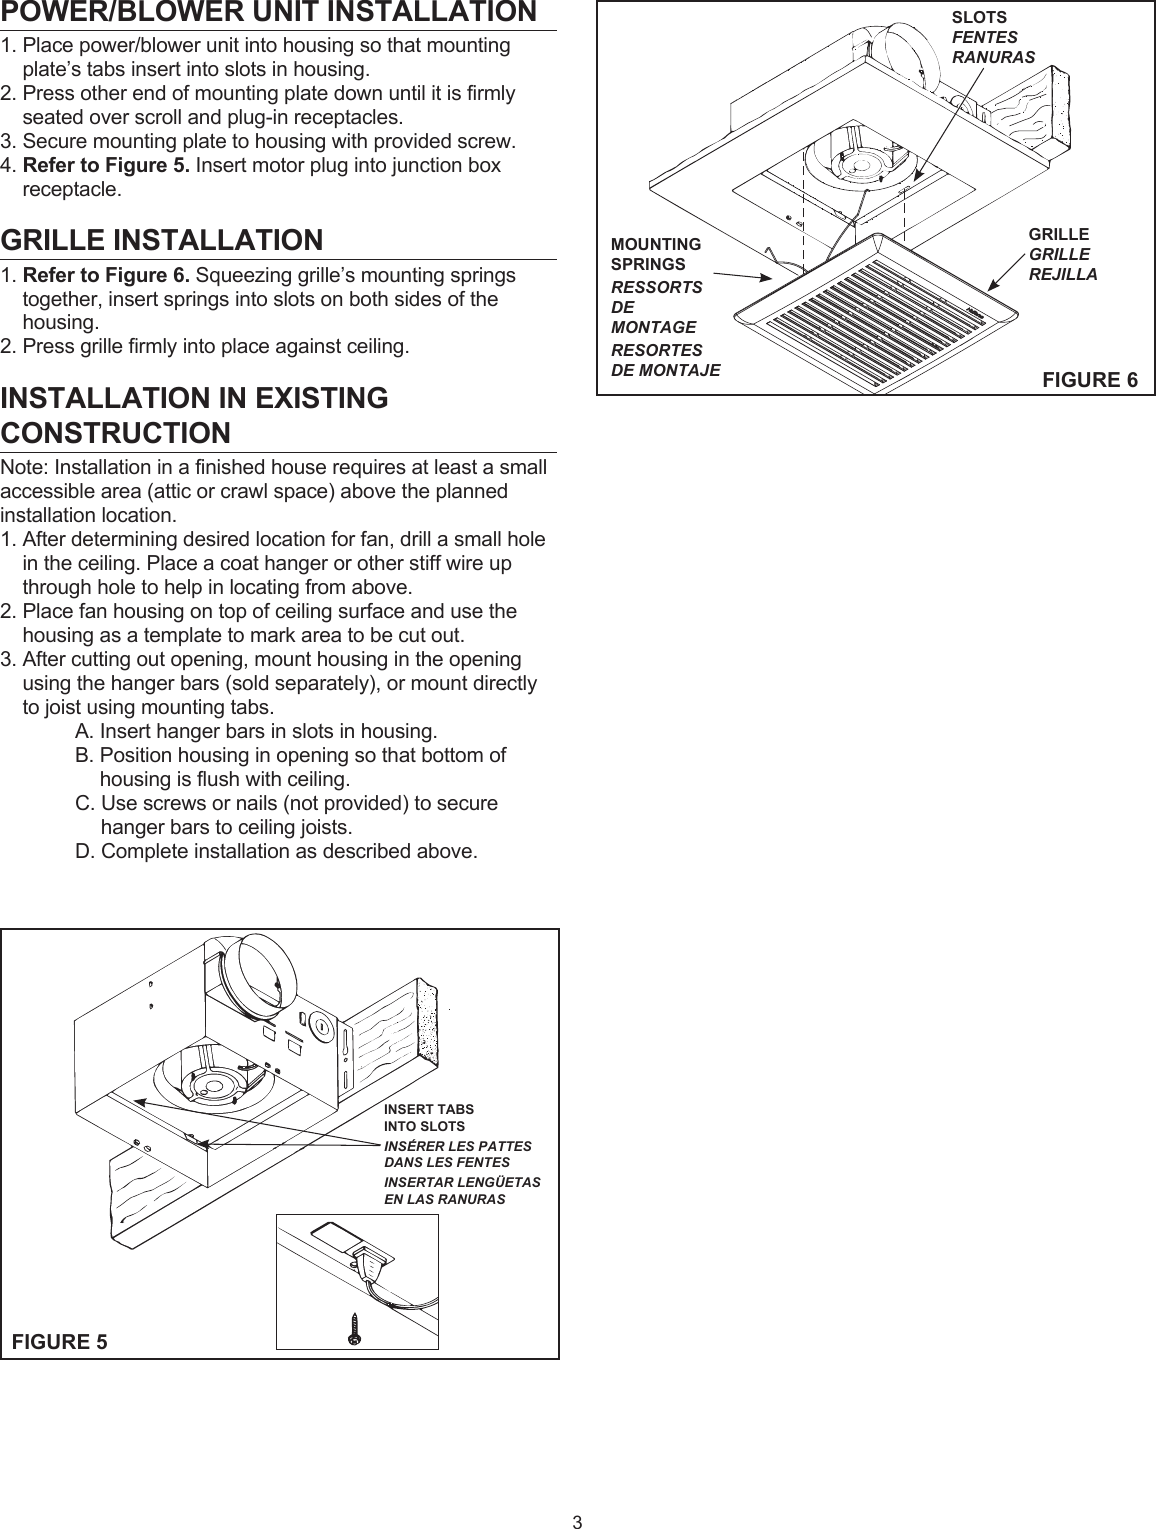 Page 3 of 6 - Broan 671 User Manual  To The Ea1ee905-99fb-4ede-8f43-1e7908010c00